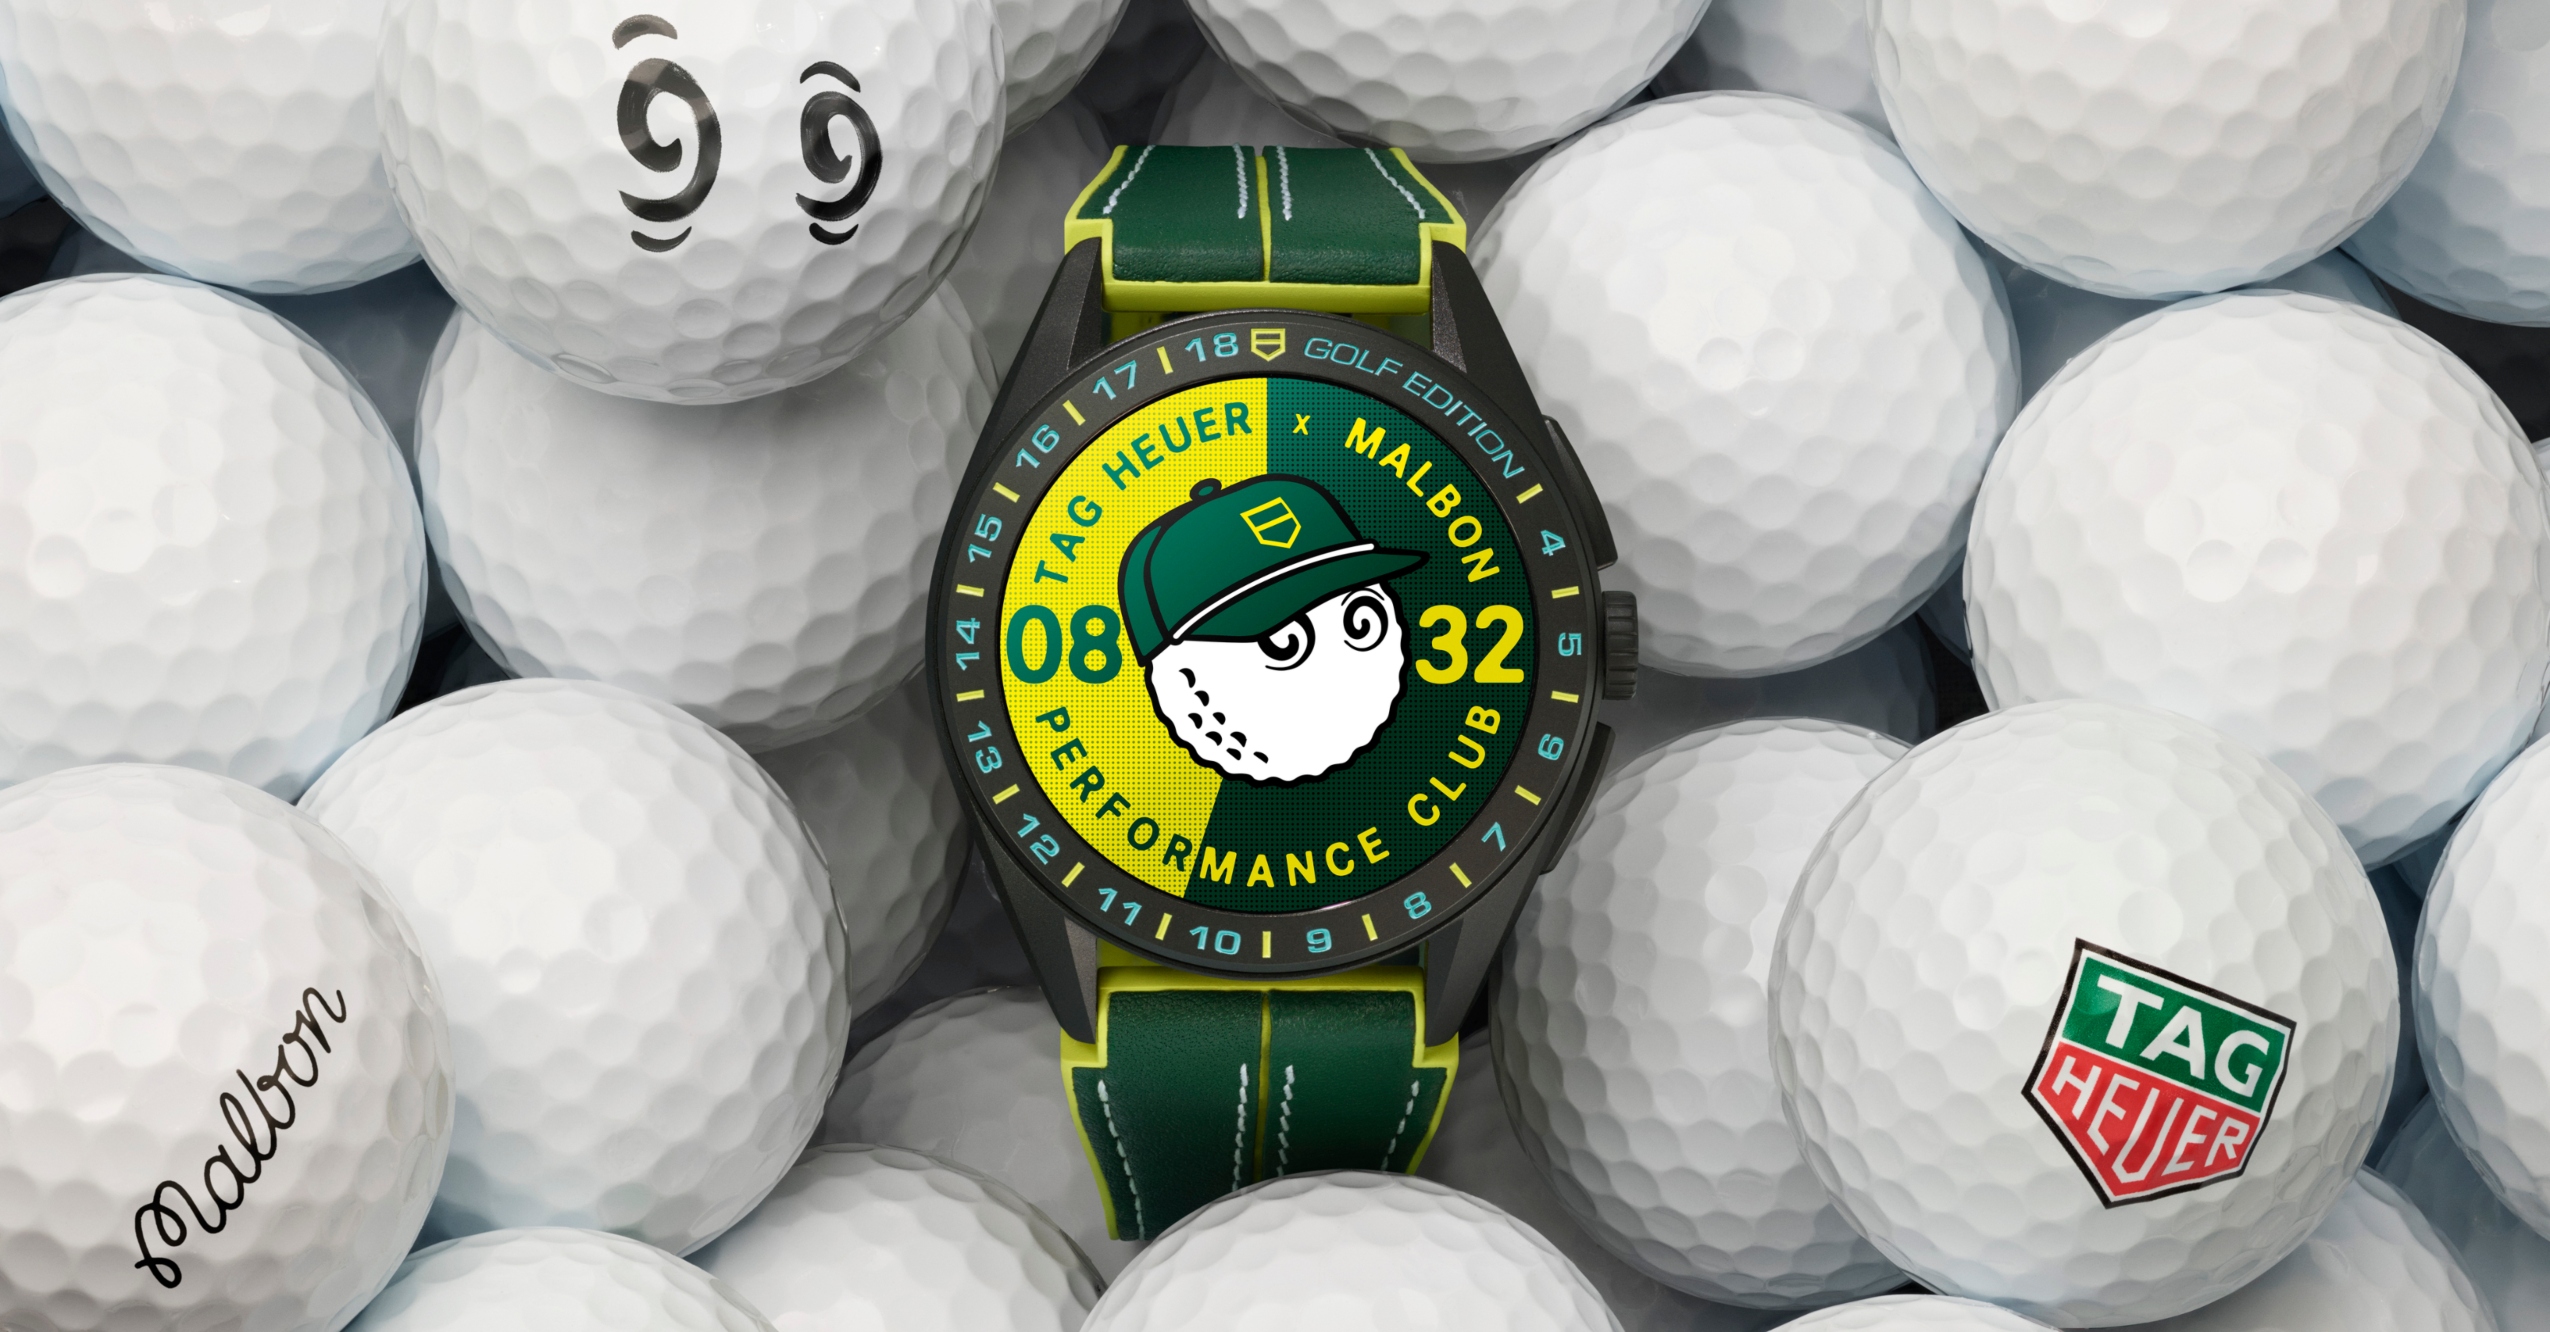 Tee Time: TAG Heuer + Malbon Golf Collab On Colorful Connected Watch For Golfers